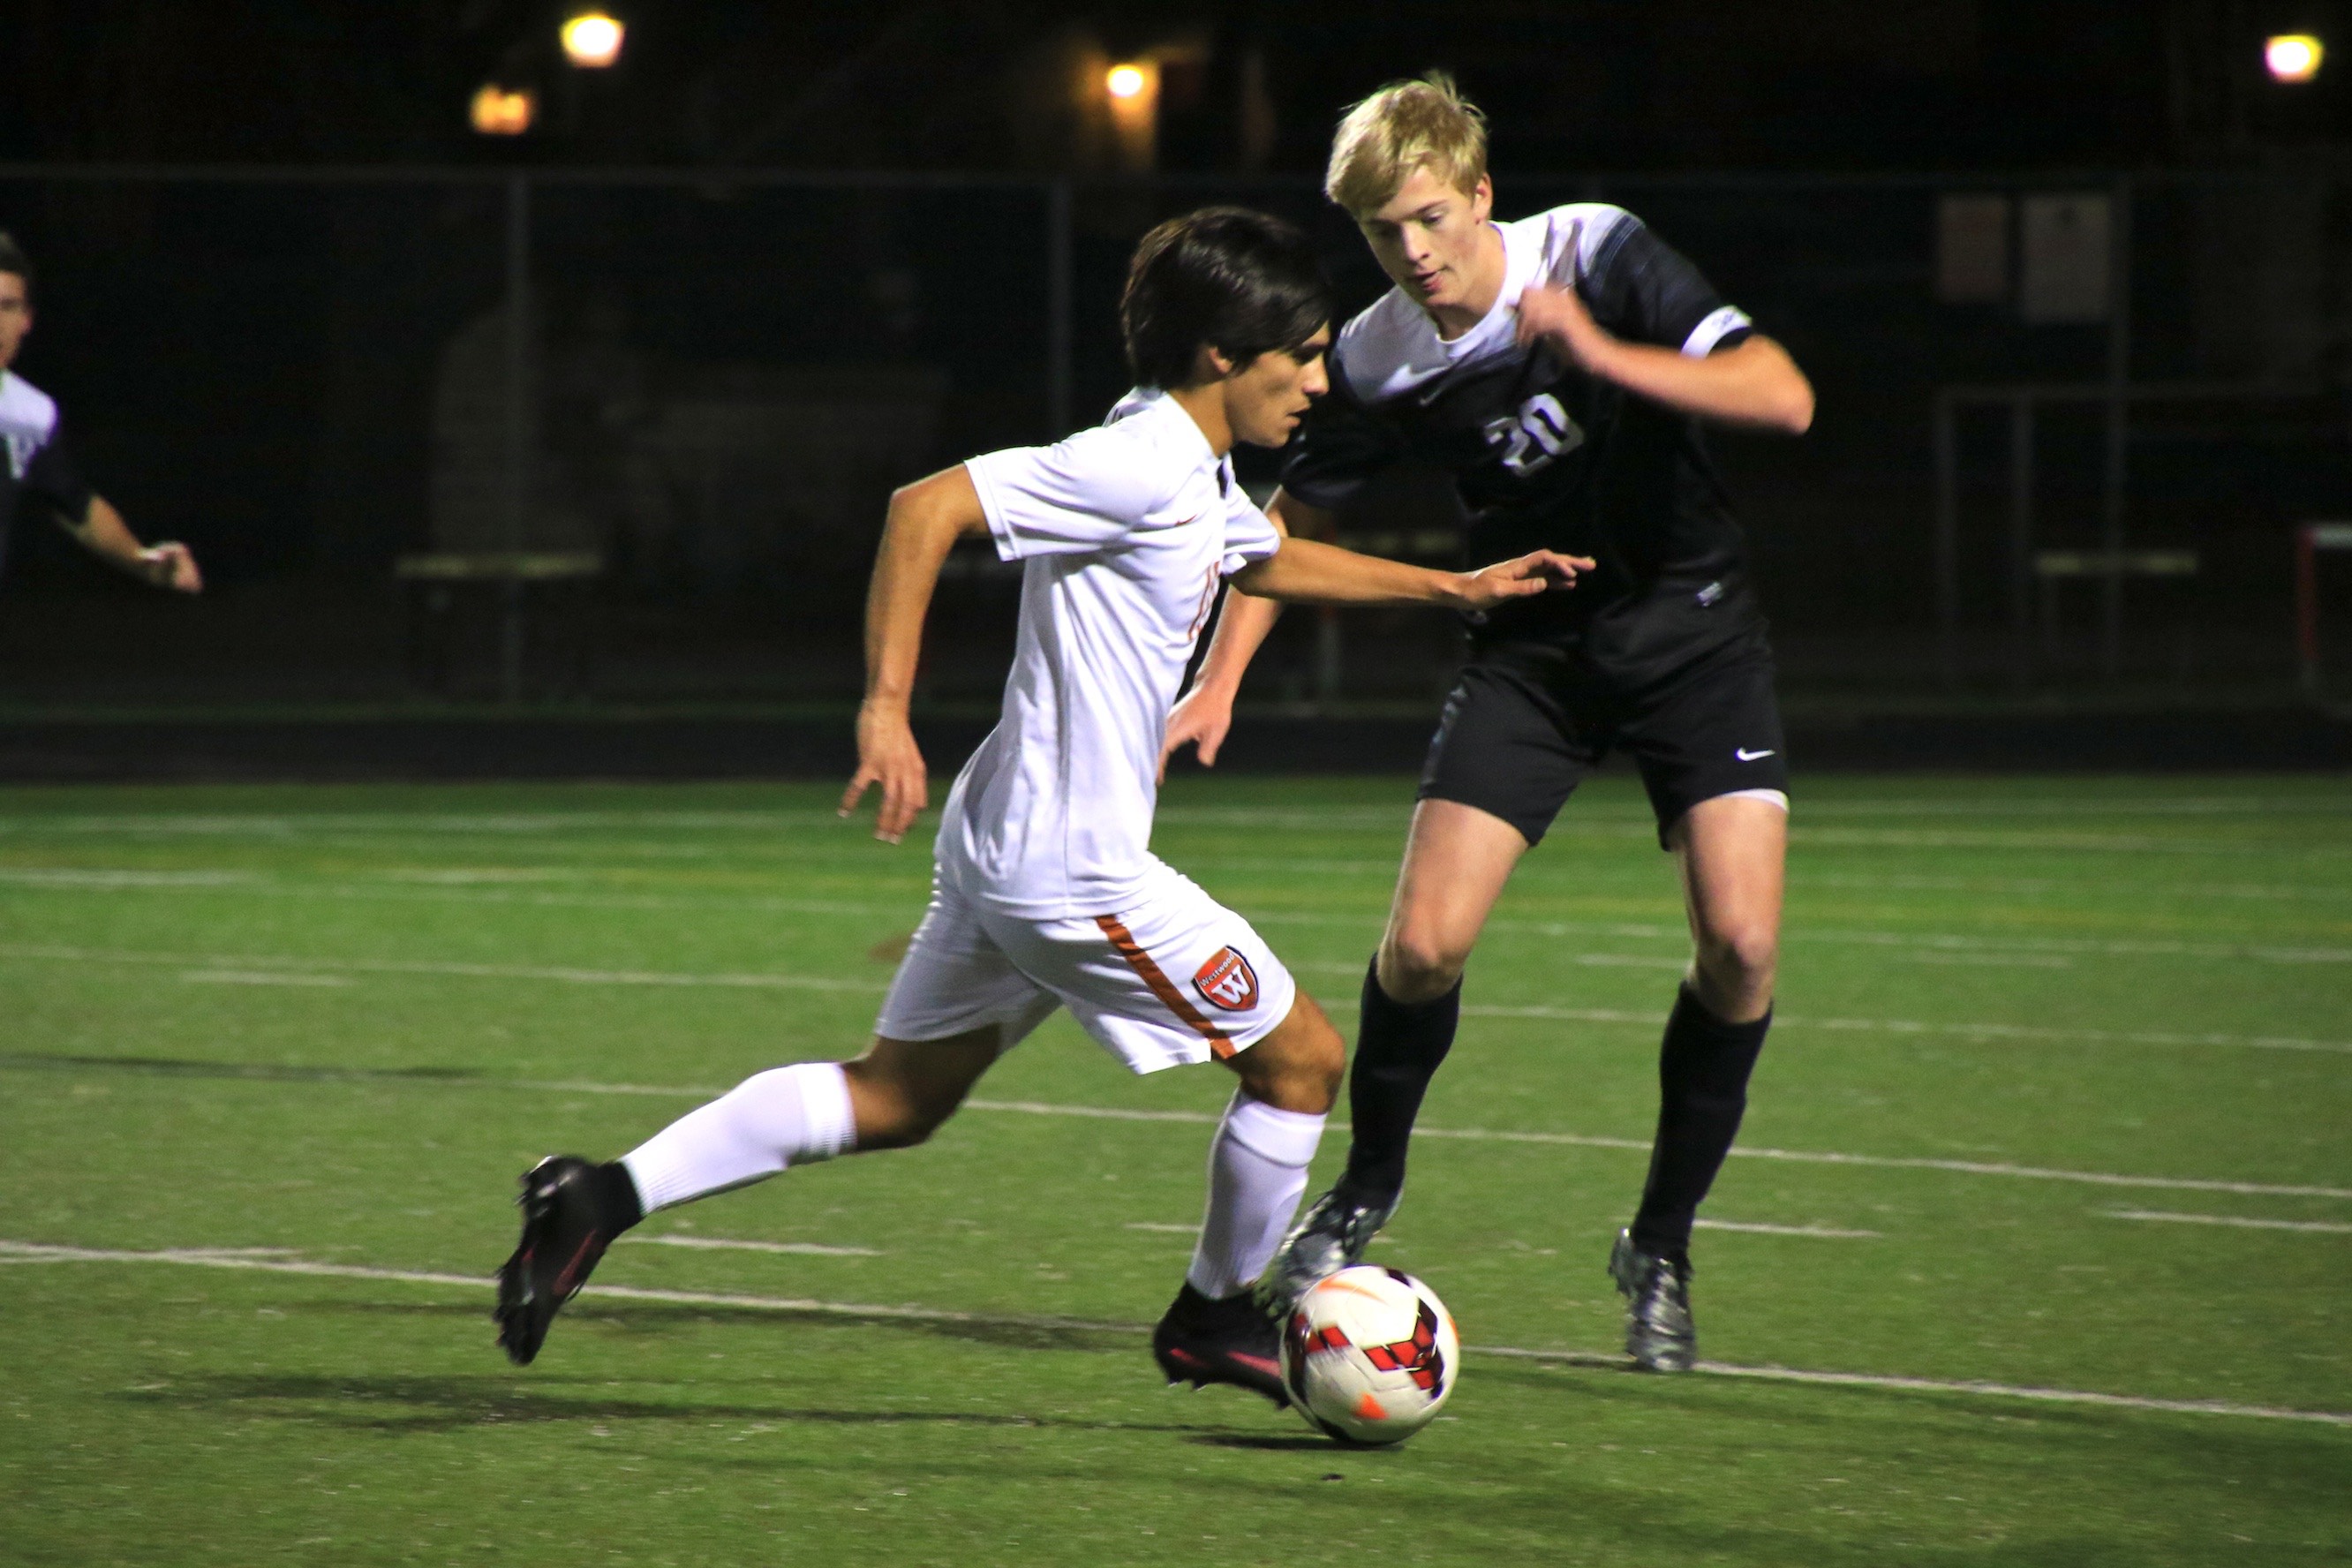 Rodriguez%2C+Vrudhula+Lead+Varsity+Boys+Soccer+To+Victory+Over+Vandegrift